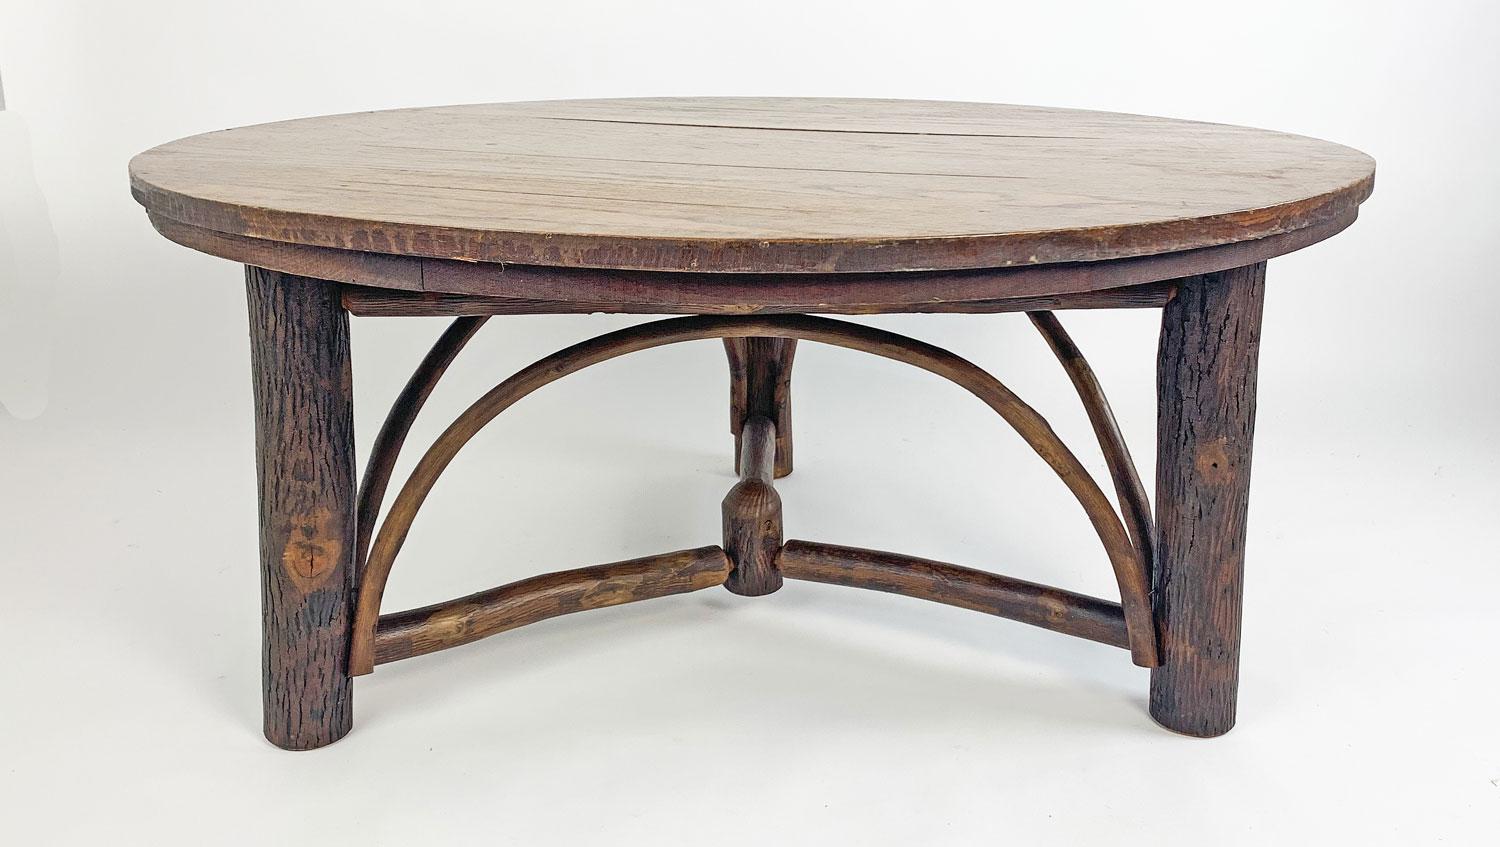 Old Hickory coffee table from the 1930s that is in great condition. It has a round oak top and a fabulous hickory pole base with spoke stretchers and arches. It is 42